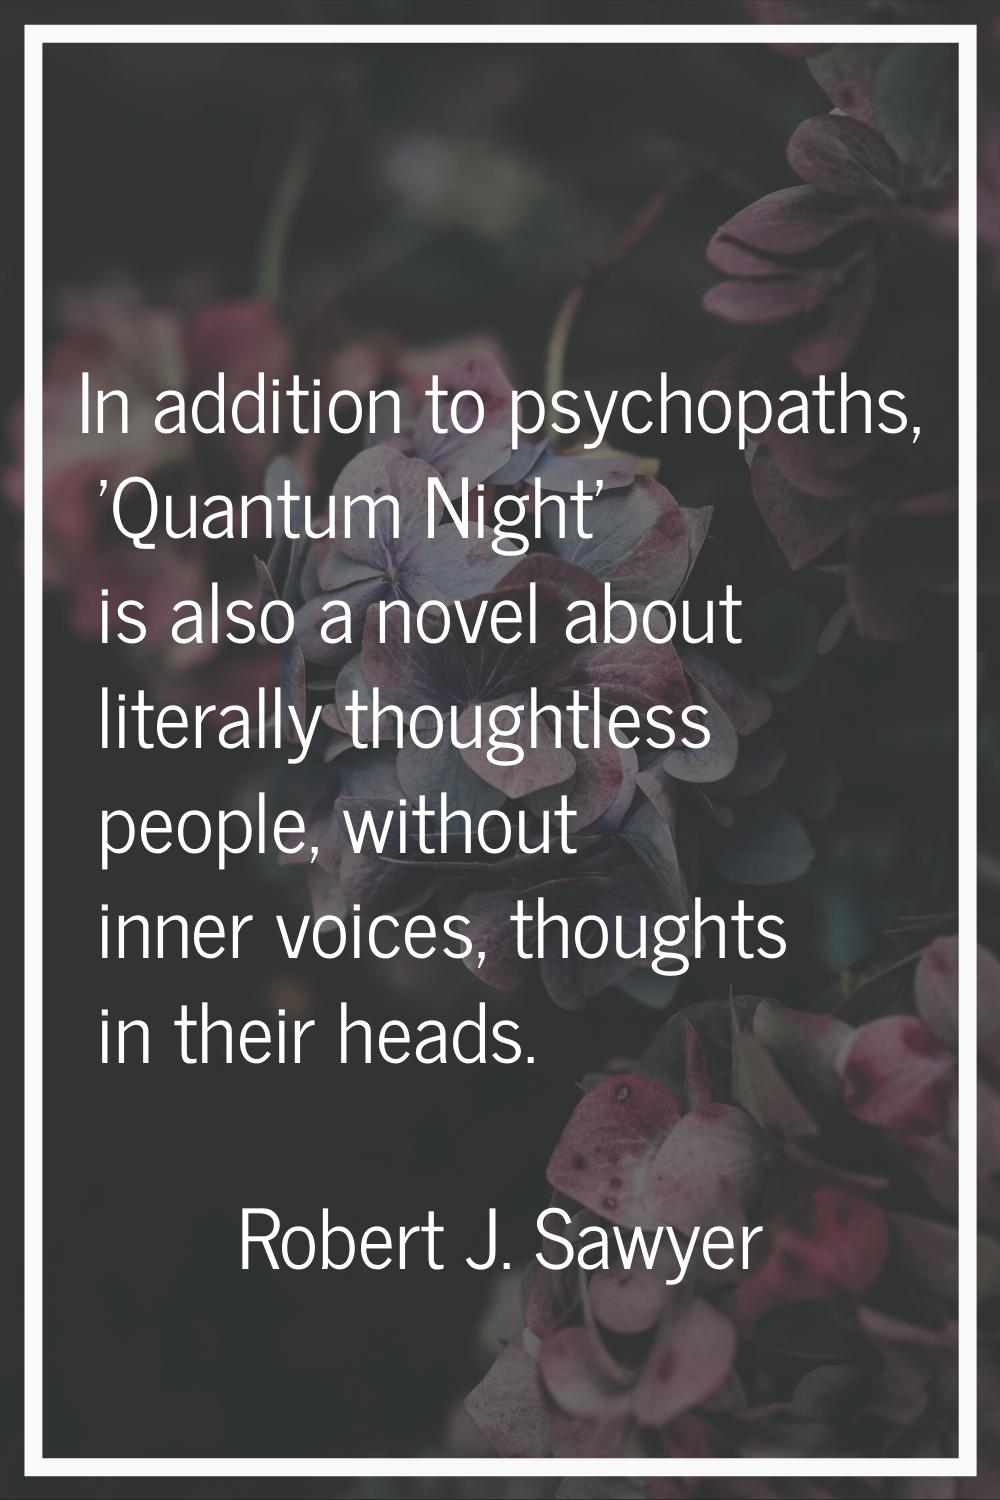 In addition to psychopaths, 'Quantum Night' is also a novel about literally thoughtless people, wit